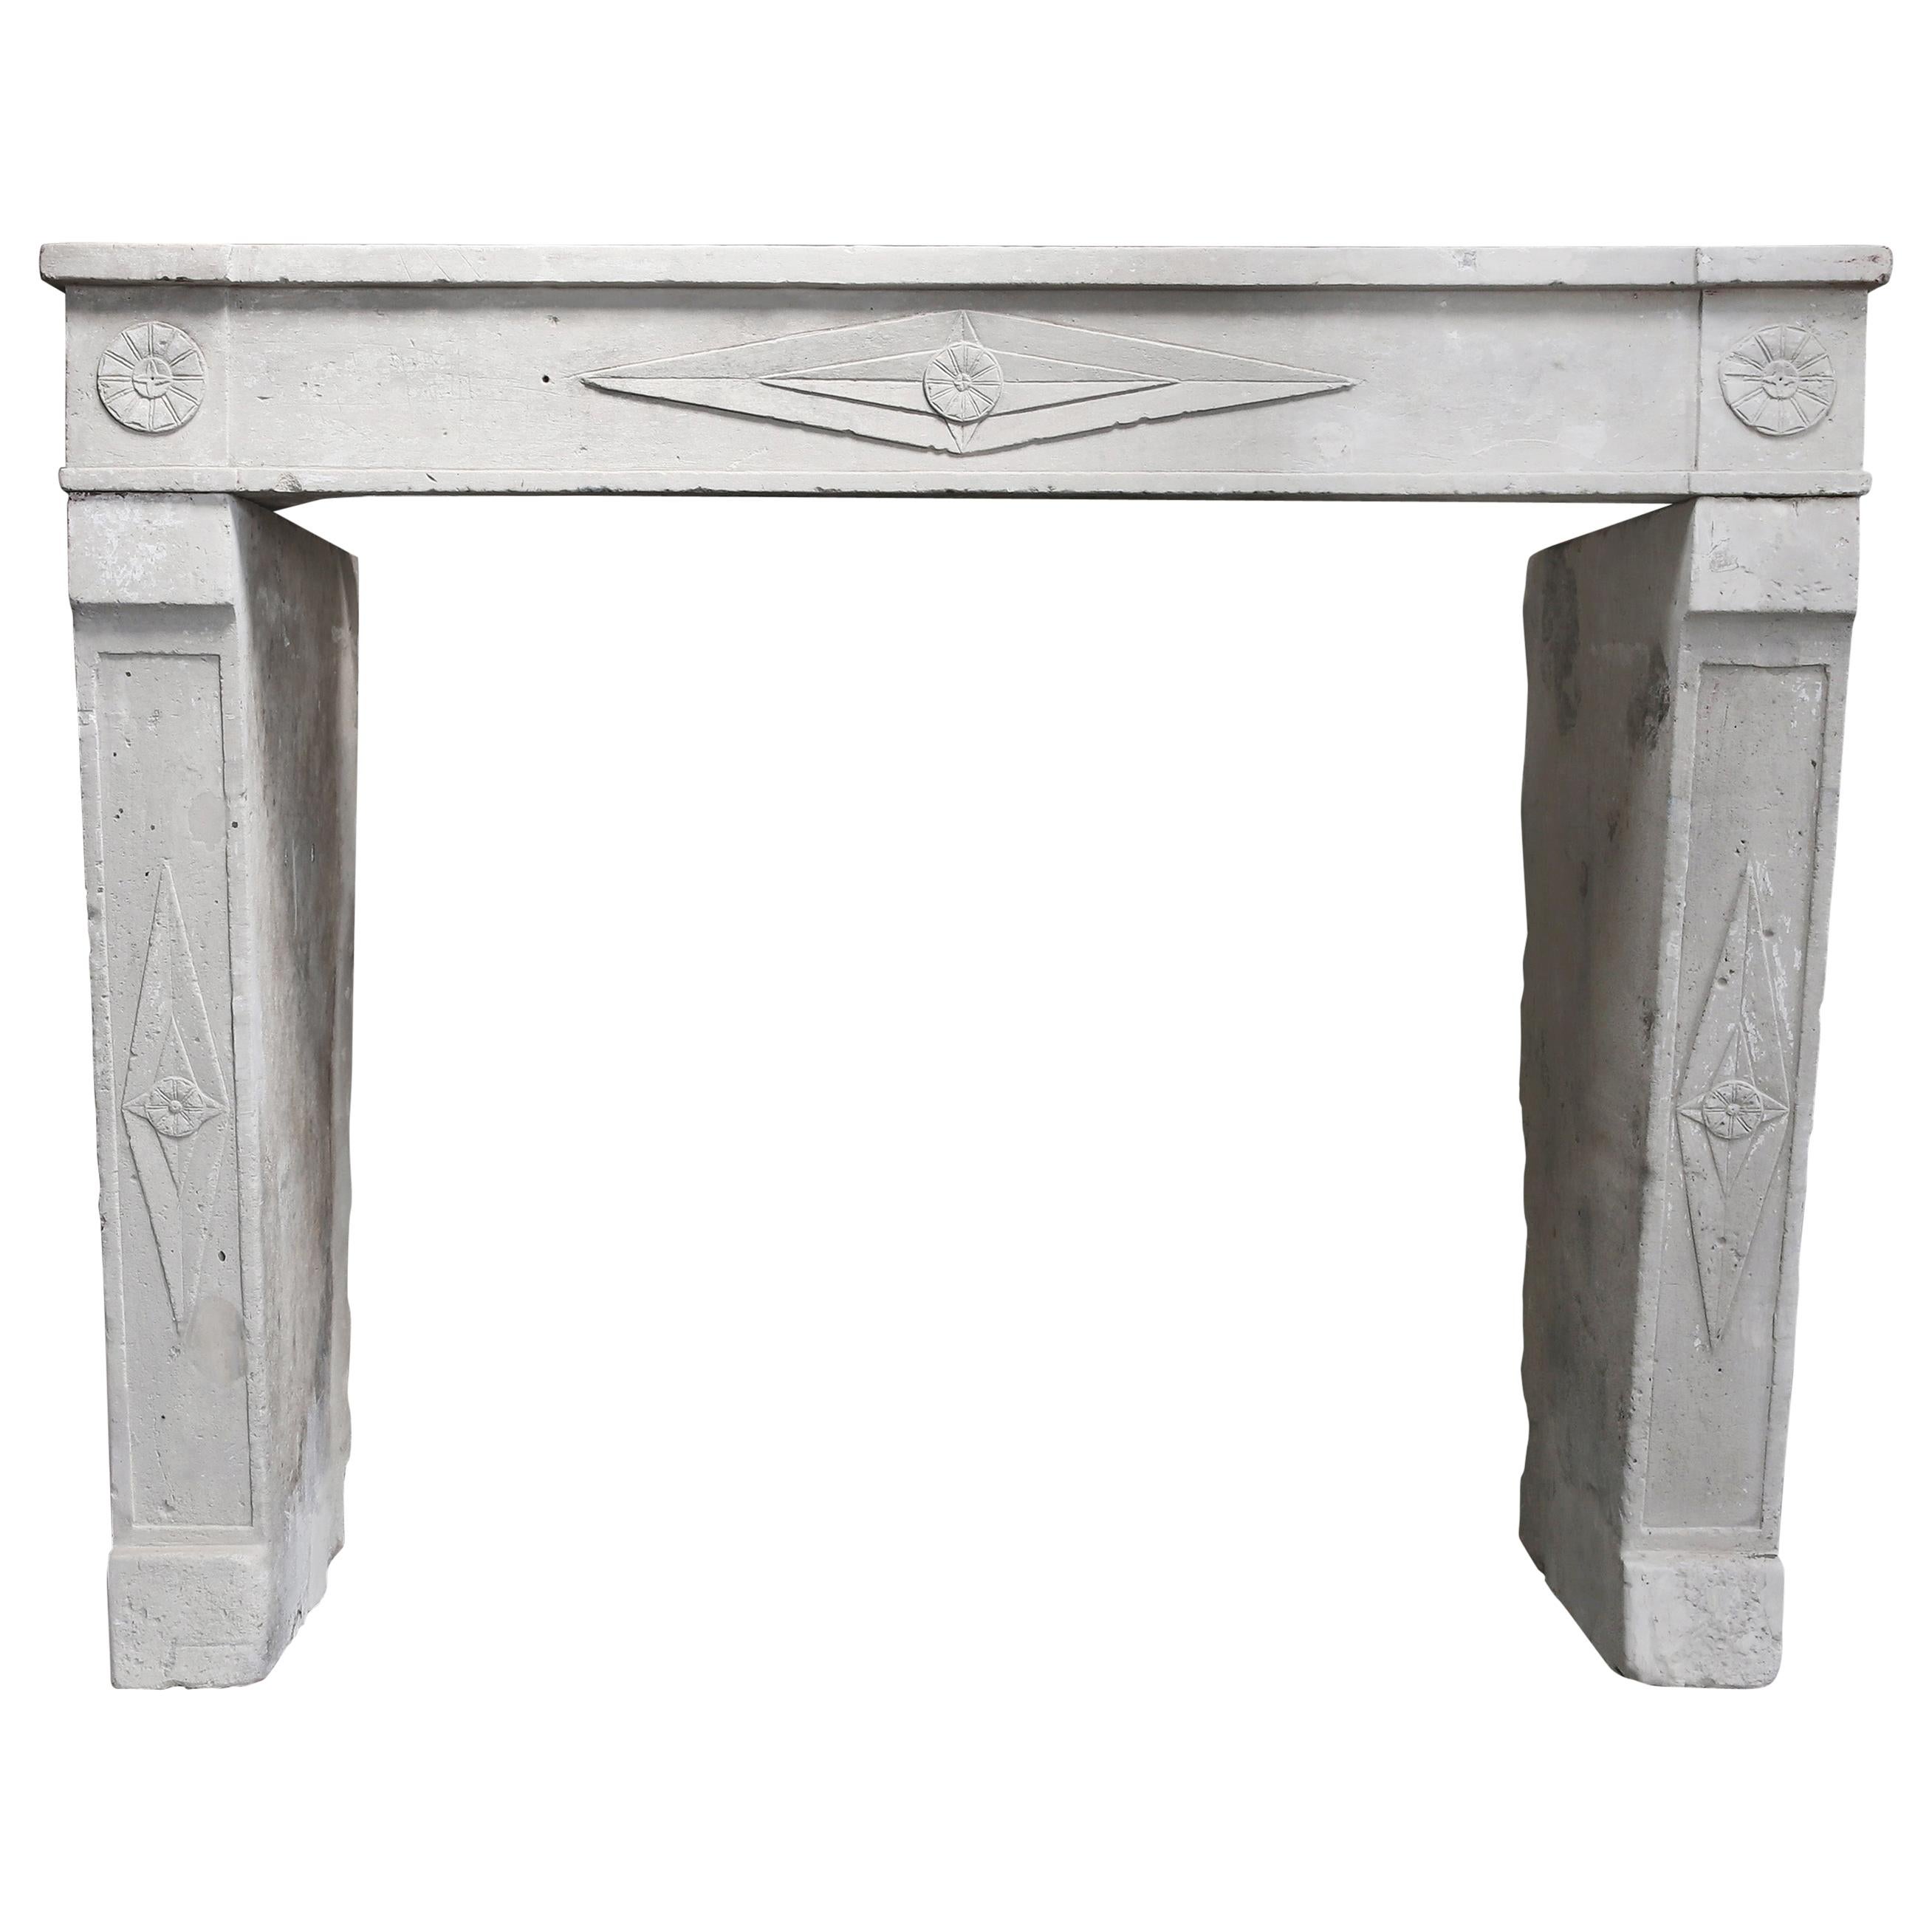 19th Century Antique Fireplace in Style of Campagnarde